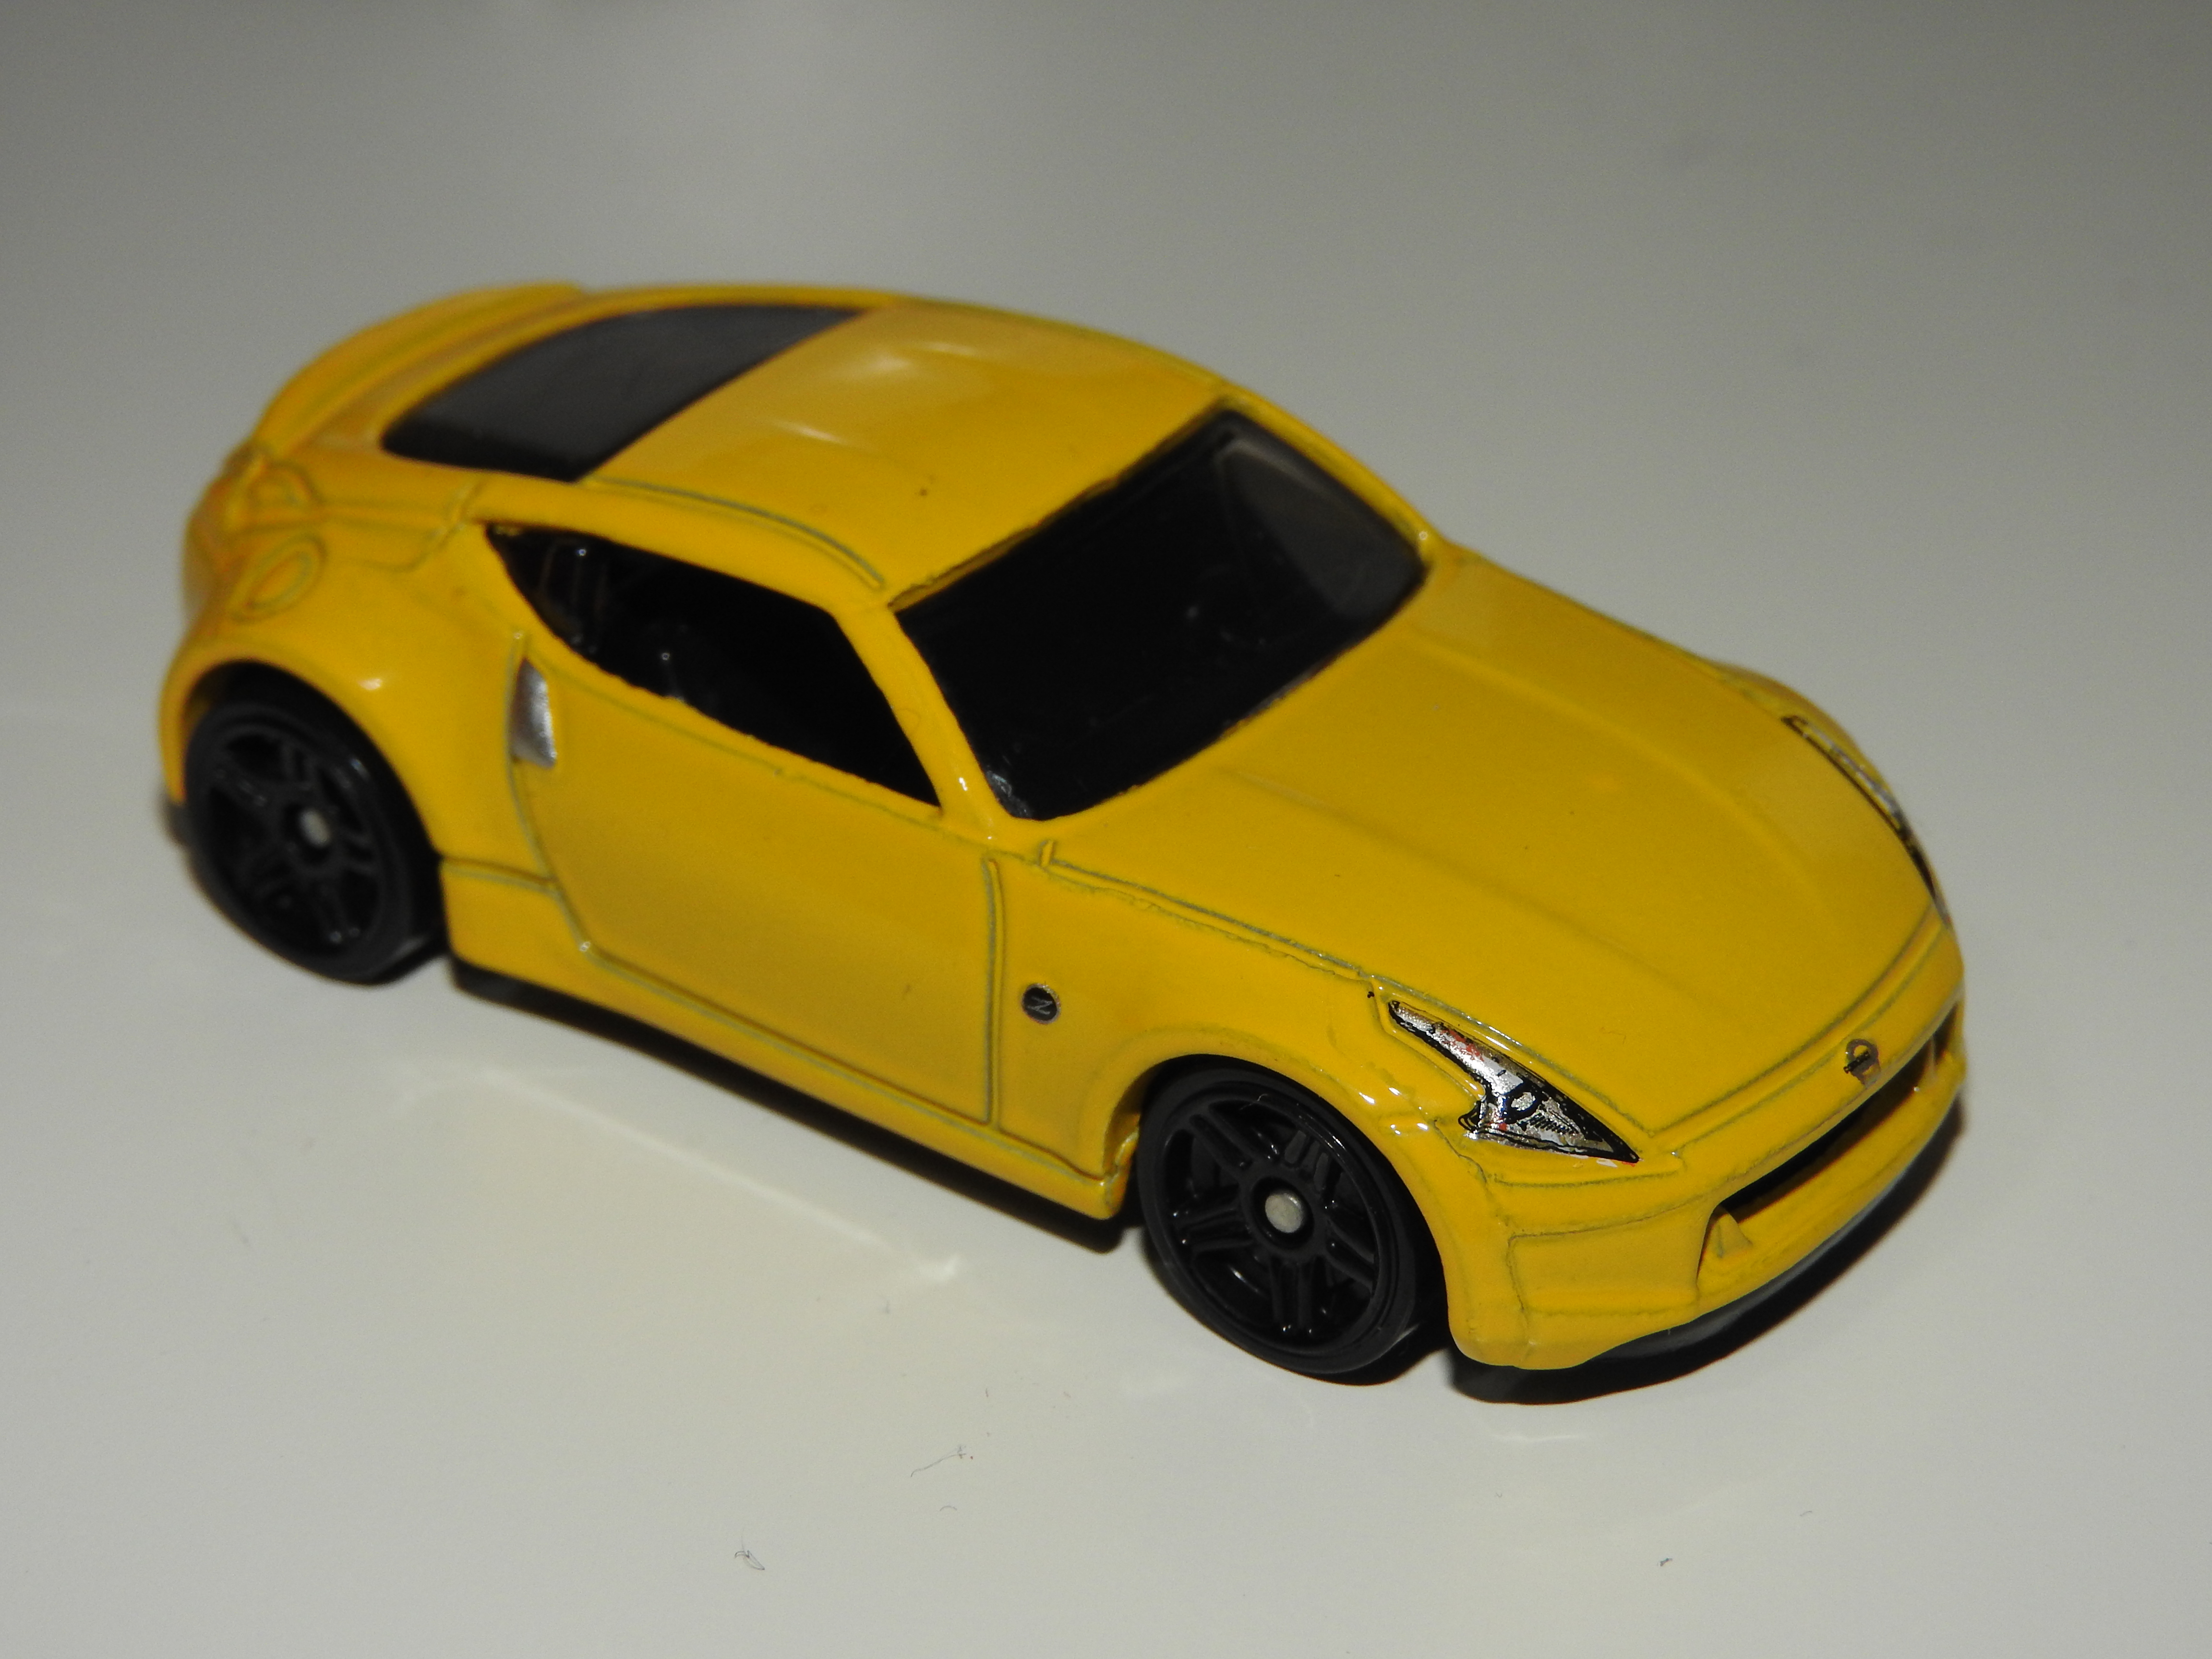 Nissan 370Z Yellow Color 2010 Hot Wheels New Models 1//64 Scale diecast car No 037